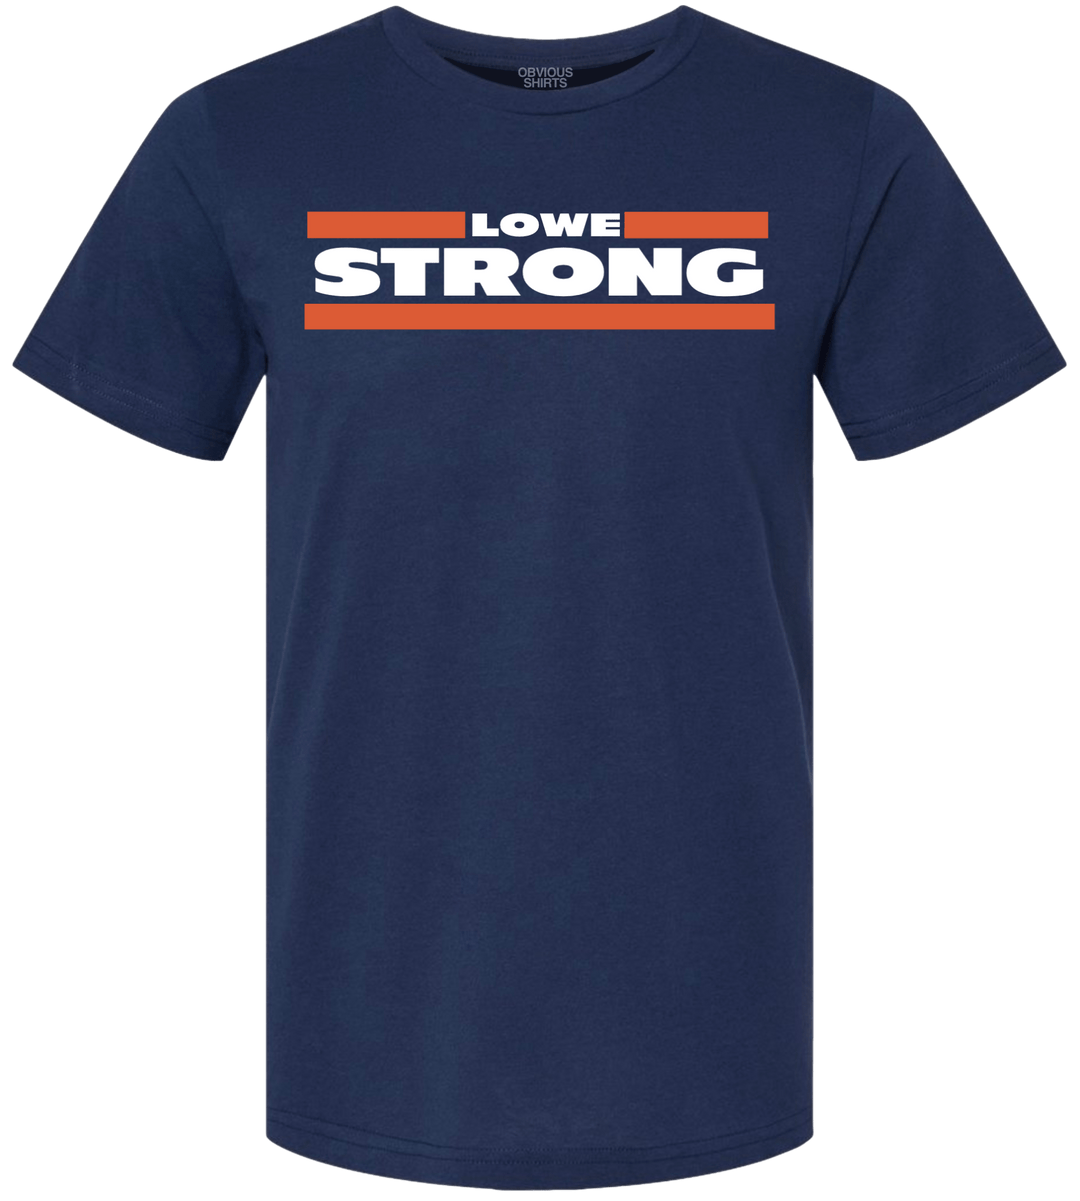 LOWE STRONG (100% DONATED) - OBVIOUS SHIRTS